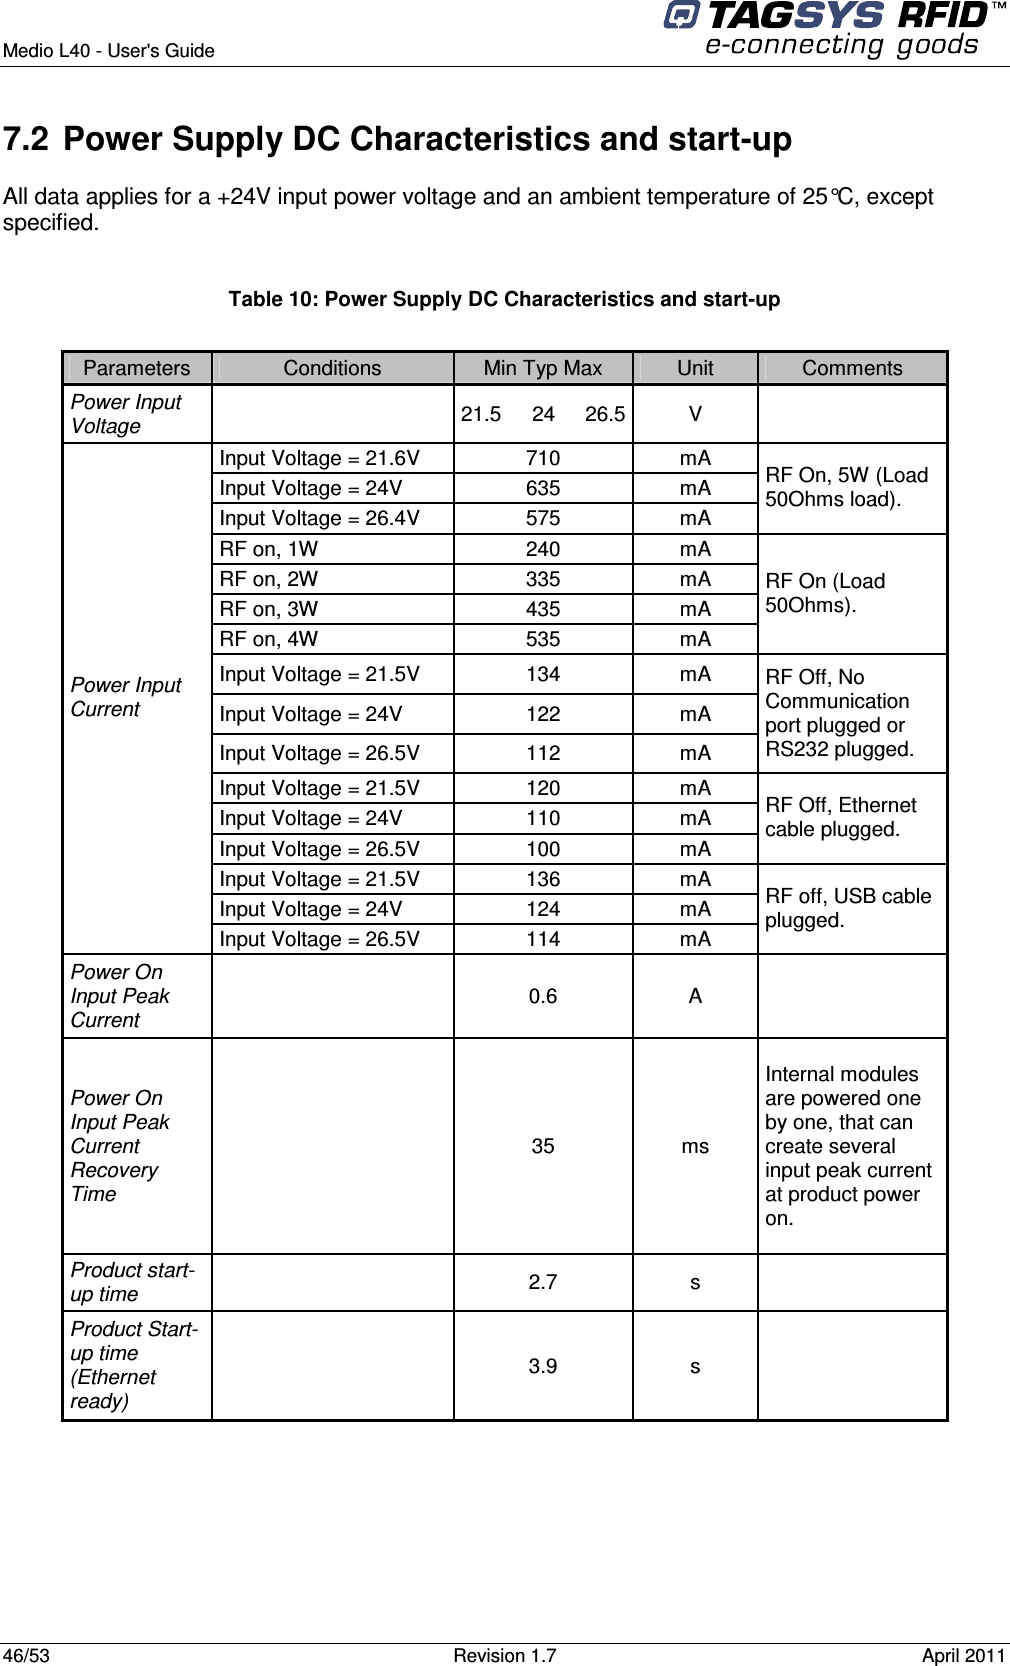  Medio L40 - User&apos;s Guide     46/53  Revision 1.7  April 2011  7.2  Power Supply DC Characteristics and start-up All data applies for a +24V input power voltage and an ambient temperature of 25°C, except specified.  Table 10: Power Supply DC Characteristics and start-up  Parameters  Conditions  Min Typ Max  Unit  Comments Power Input Voltage     21.5  24  26.5 V    Input Voltage = 21.6V  710  mA Input Voltage = 24V  635  mA Input Voltage = 26.4V  575  mA RF On, 5W (Load 50Ohms load). RF on, 1W  240  mA RF on, 2W  335  mA RF on, 3W  435  mA RF on, 4W  535  mA RF On (Load 50Ohms). Input Voltage = 21.5V  134  mA Input Voltage = 24V  122  mA Input Voltage = 26.5V  112  mA RF Off, No Communication port plugged or RS232 plugged. Input Voltage = 21.5V  120  mA Input Voltage = 24V  110  mA Input Voltage = 26.5V  100  mA RF Off, Ethernet cable plugged. Input Voltage = 21.5V  136  mA Input Voltage = 24V  124  mA Power Input Current  Input Voltage = 26.5V  114  mA RF off, USB cable plugged. Power On Input Peak Current    0.6  A    Power On Input Peak Current Recovery Time    35  ms Internal modules are powered one by one, that can create several input peak current at product power on. Product start-up time     2.7  s    Product Start-up time (Ethernet ready)    3.9  s     